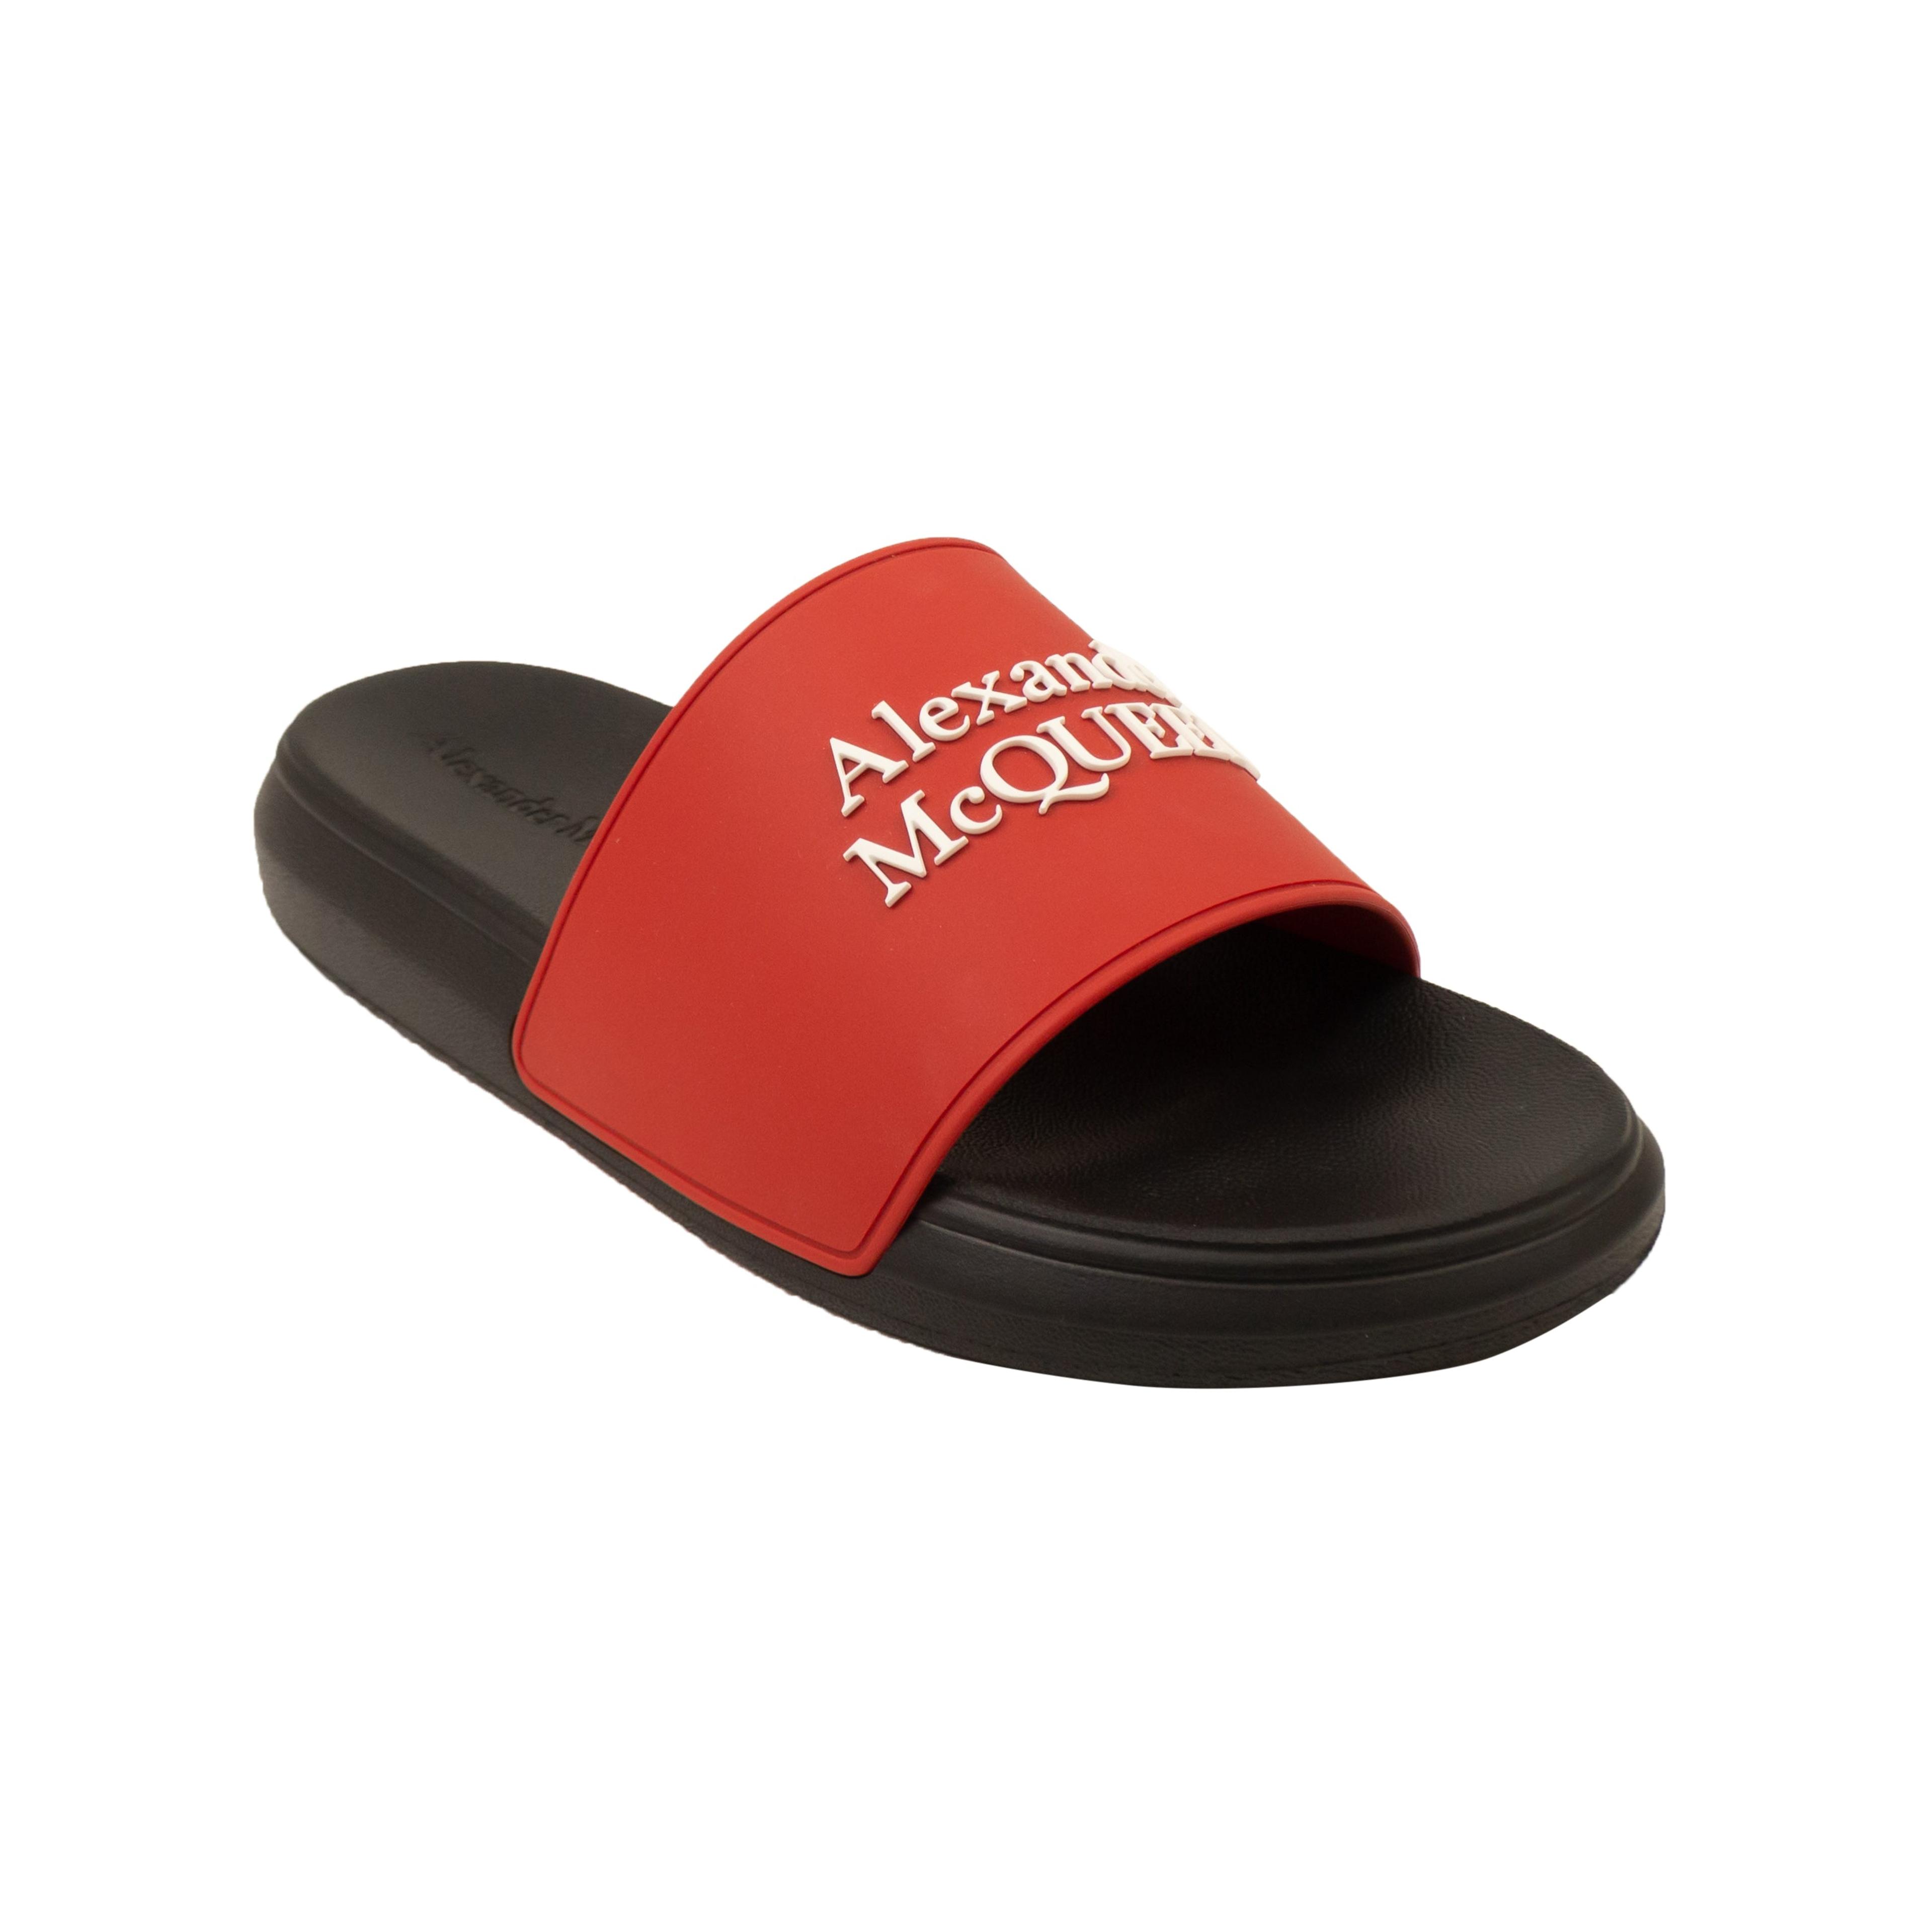 Alternate View 1 of Black And Red Logo Pool Slides